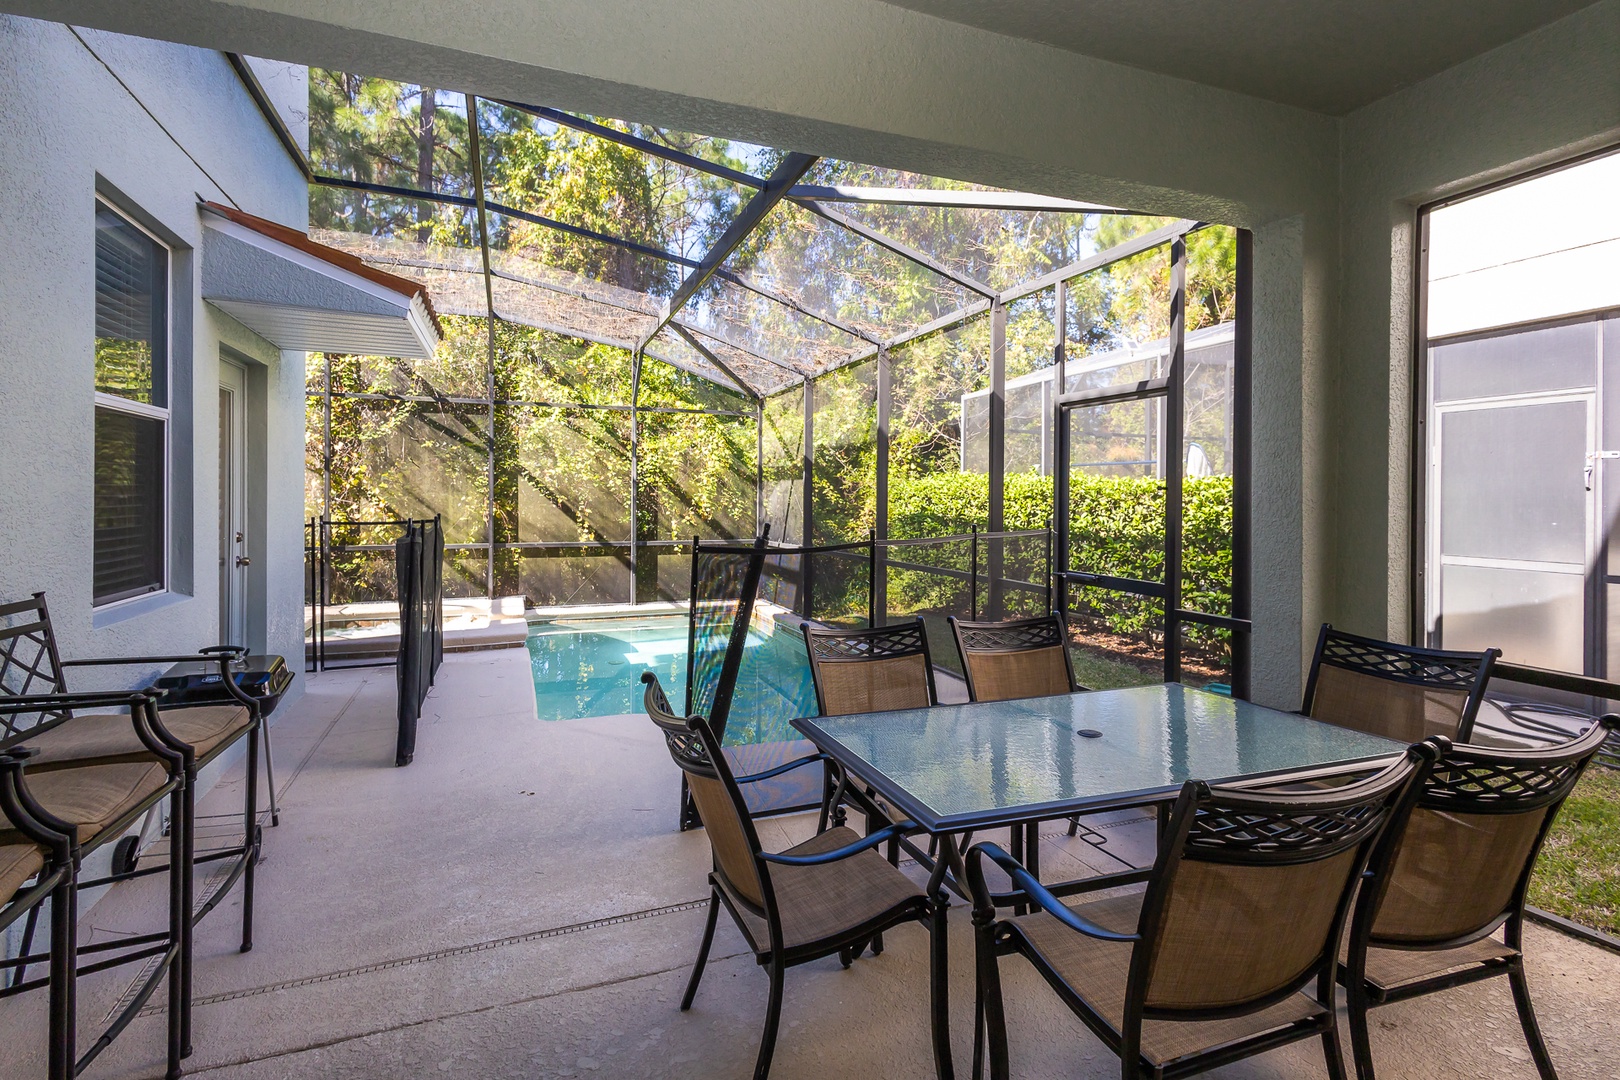 Enjoy al fresco dining before an evening dip in your own lanai-covered pool